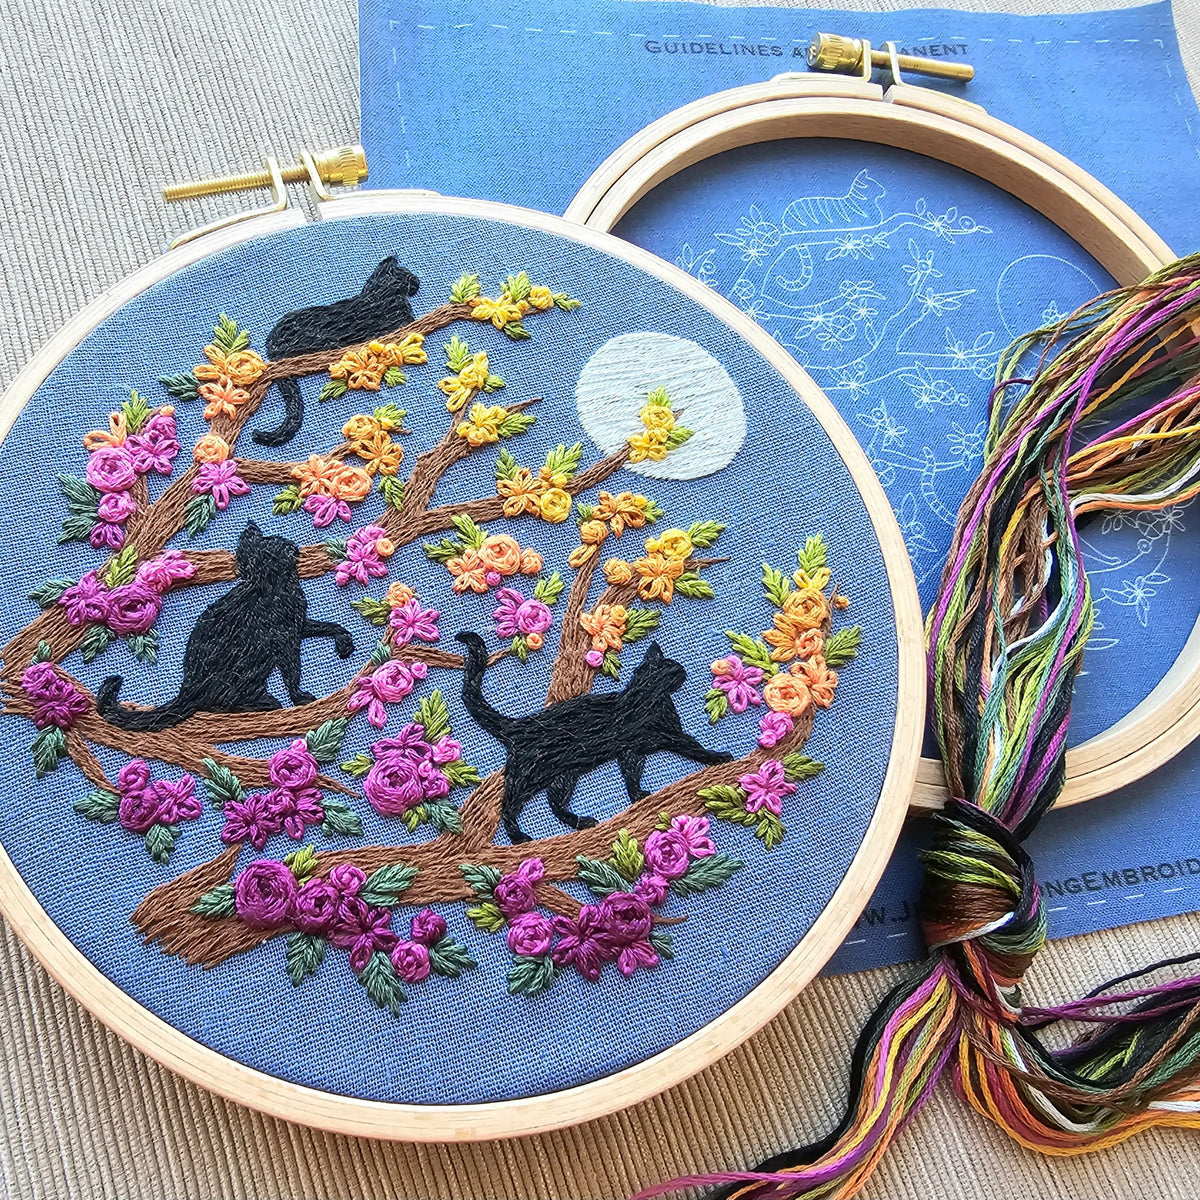 Cats and Full Moon Hand Embroidery Kit